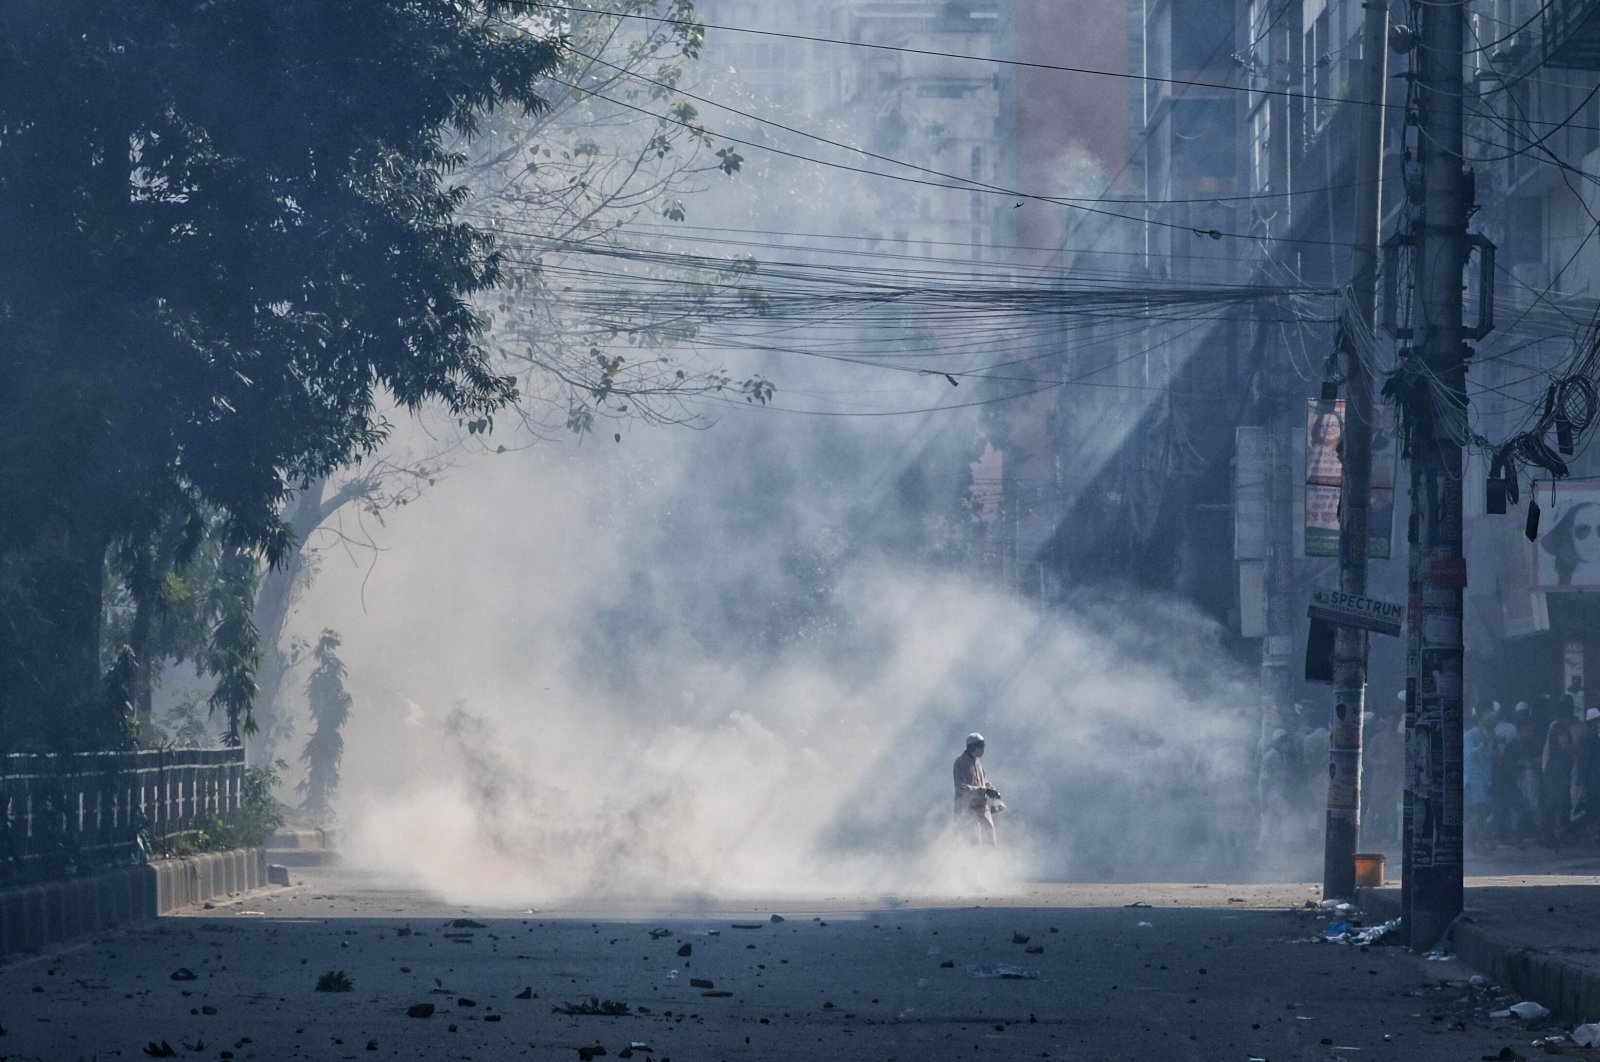 Teargas smoke rises after police clashed with Muslim devotees during a protest over an alleged desecration of the Quran, outside Bangladesh's national mosque Baitul Mukarram, Dhaka, Bangladesh, Oct. 15, 2021. (AP Photo)